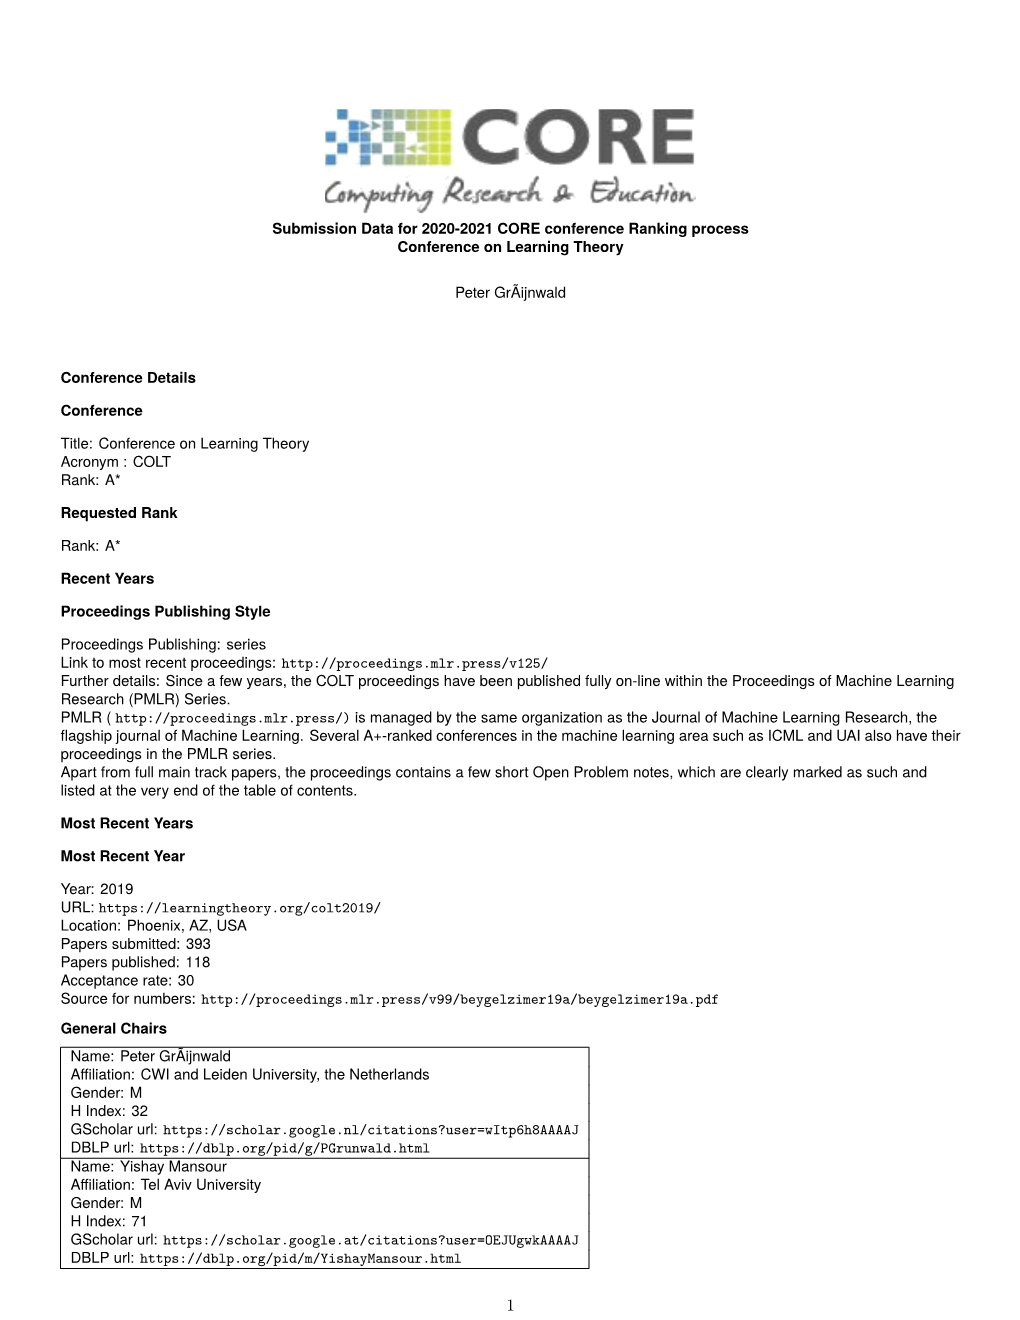 Submission Data for 2020-2021 CORE Conference Ranking Process Conference on Learning Theory